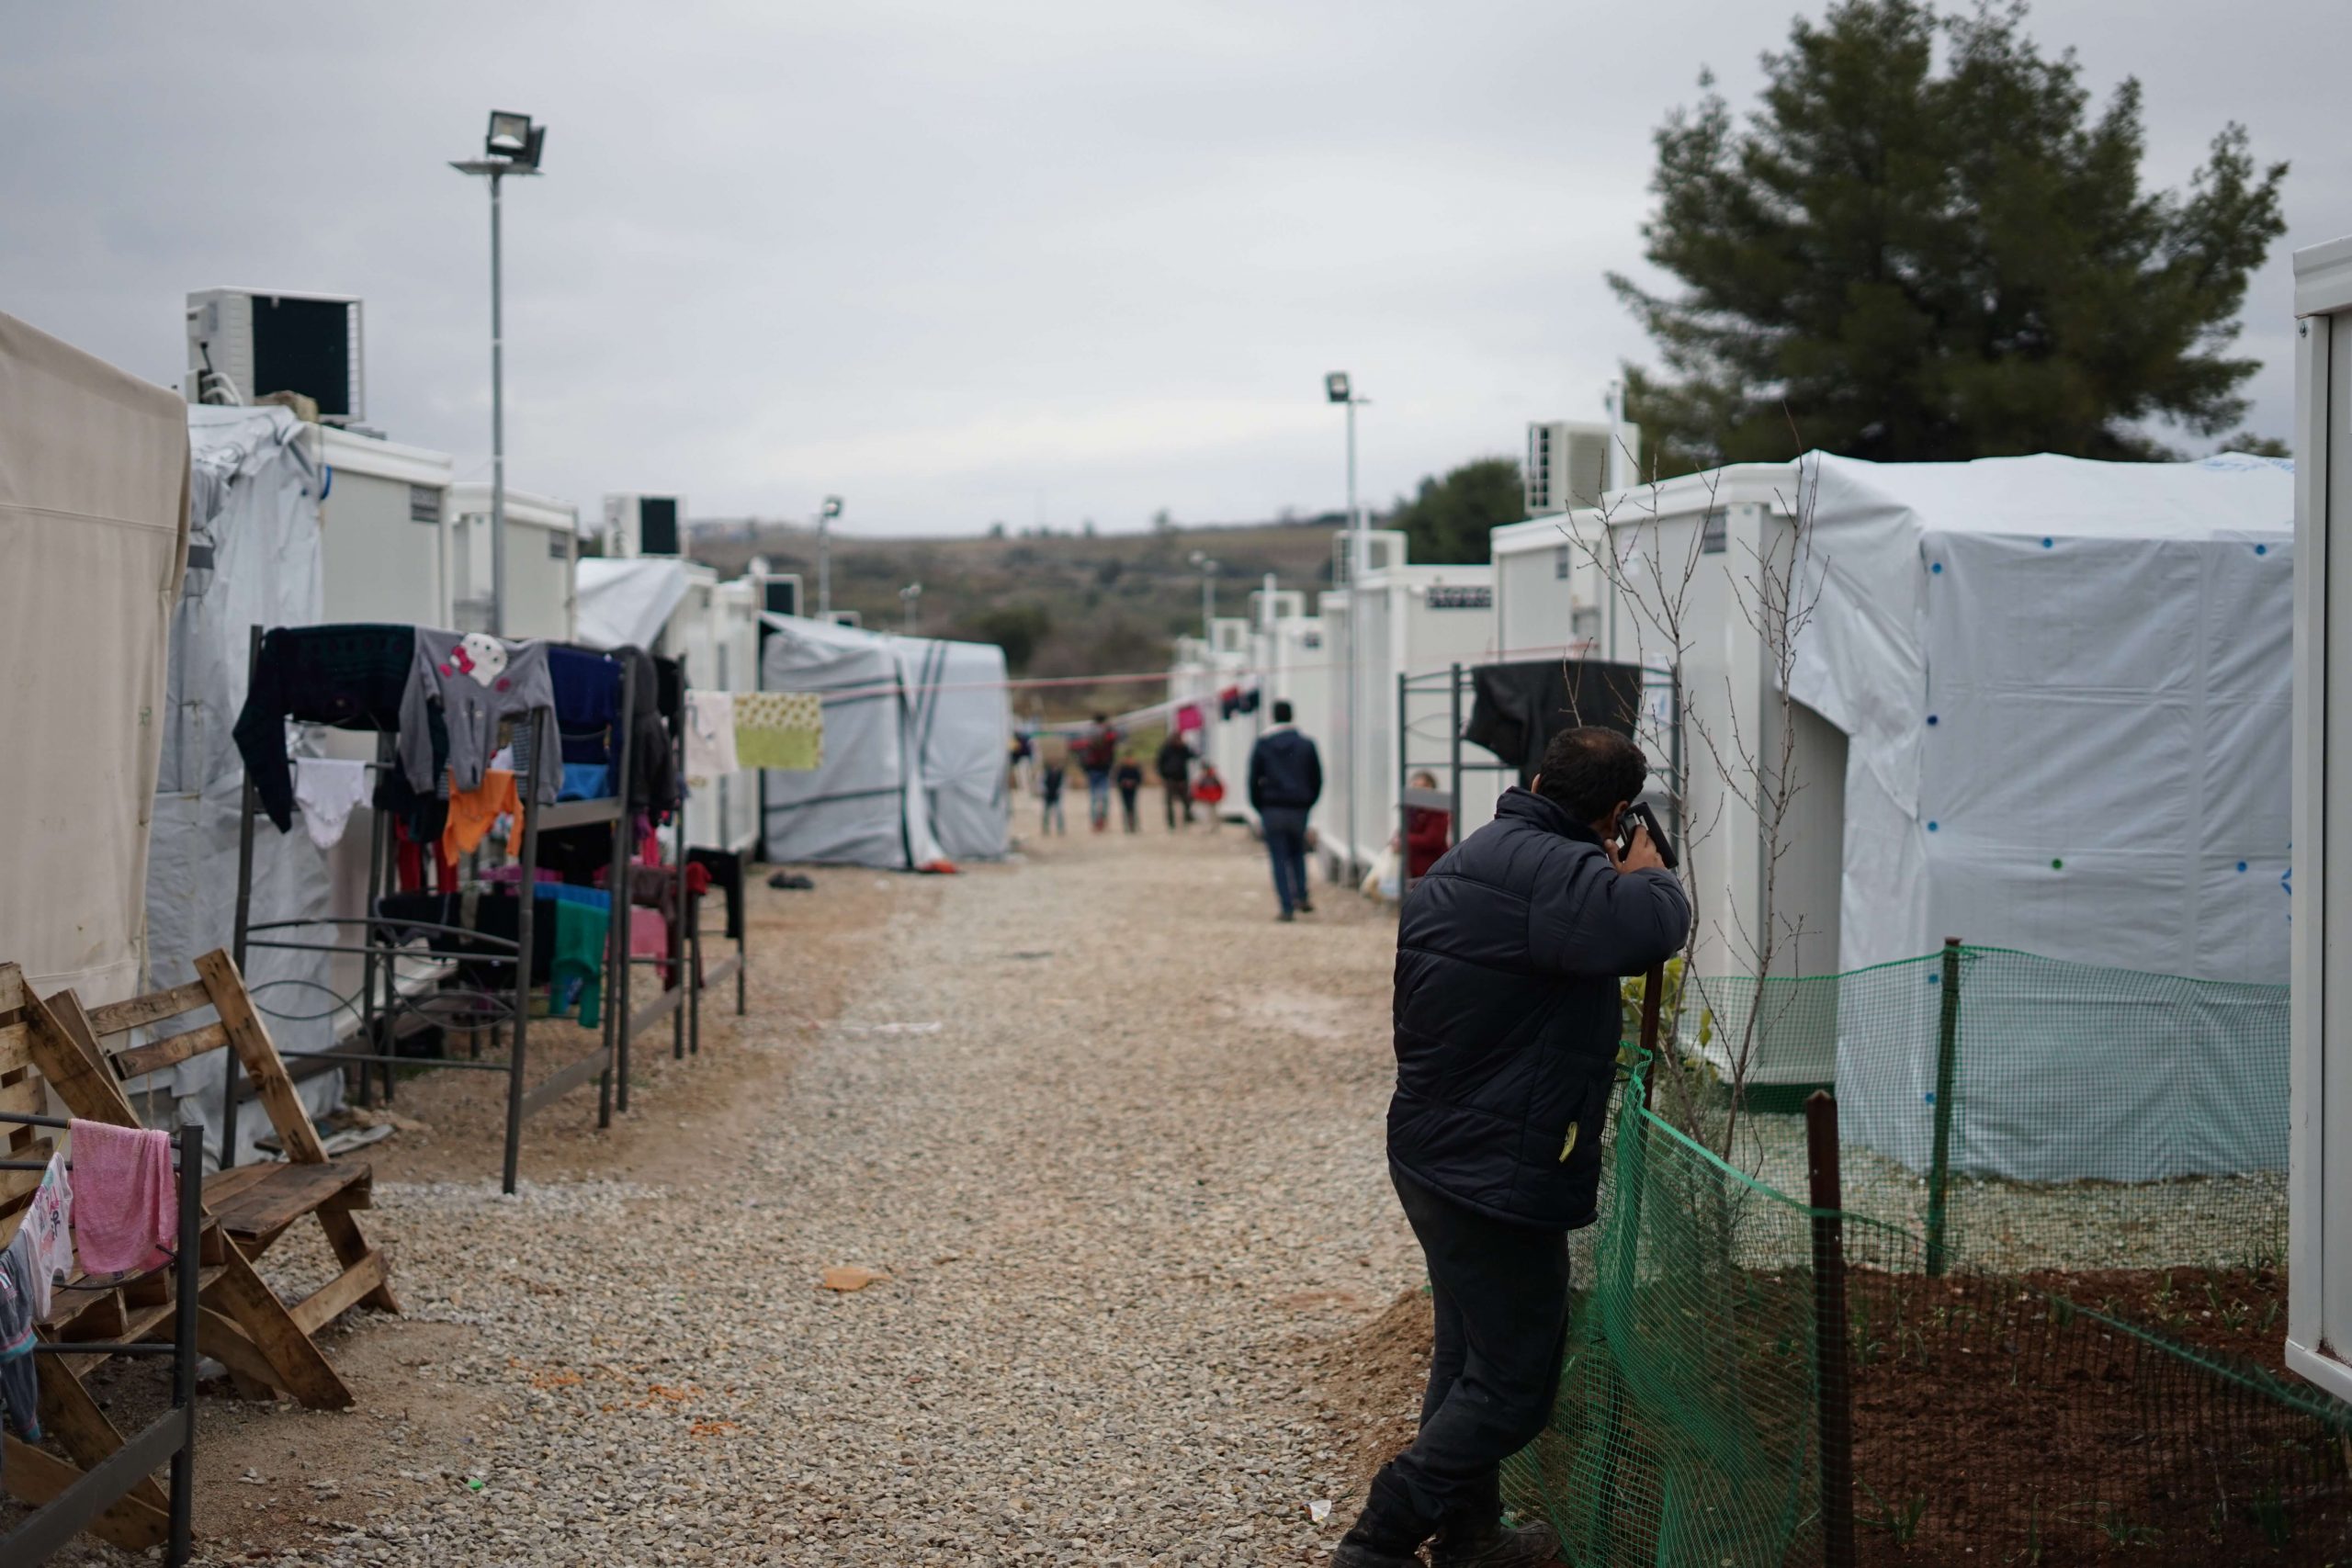 Syrian refugee camp in the outskirts of Athens. Free to use under the Unsplash License